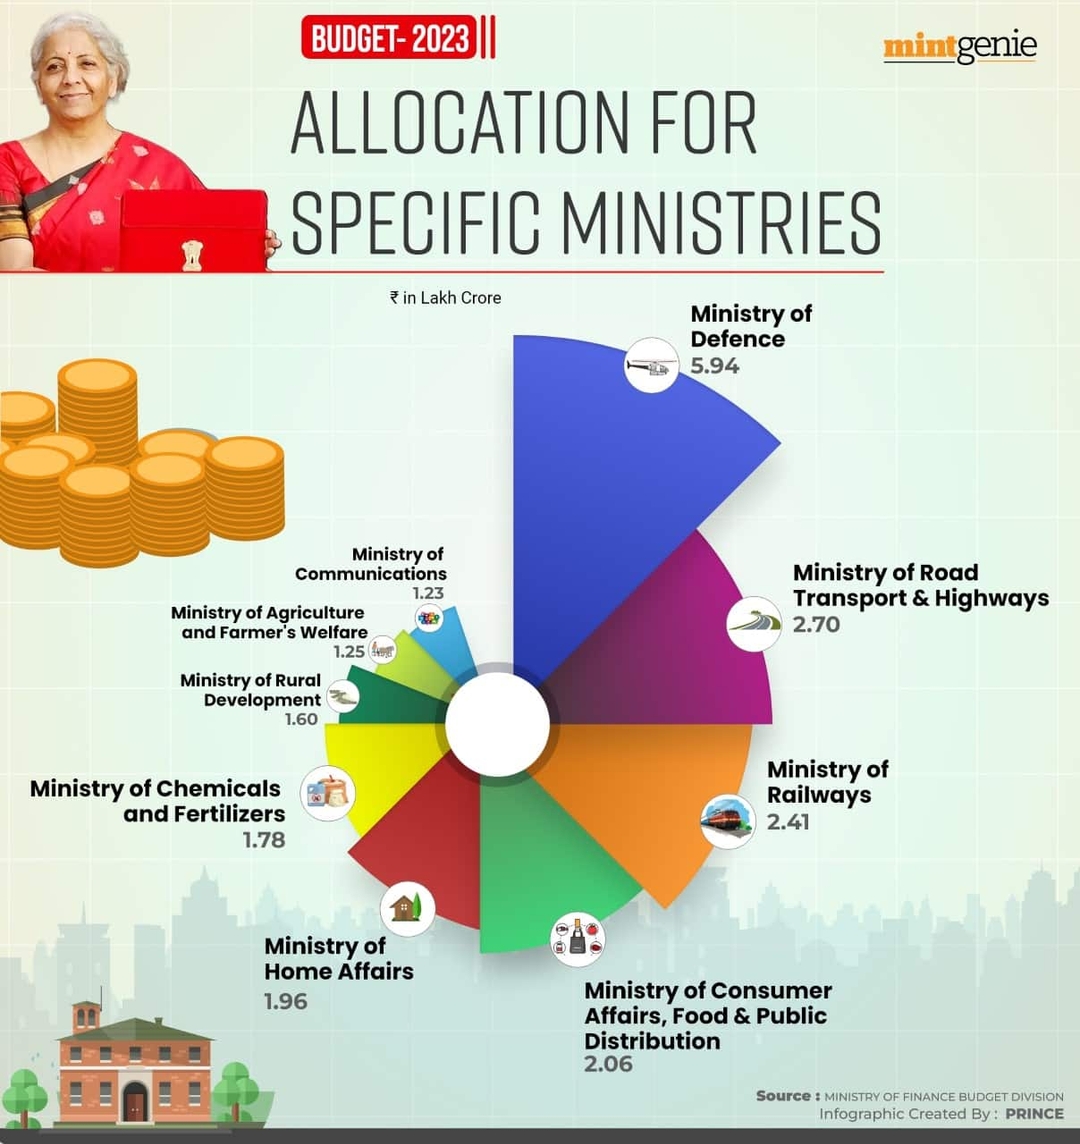 Budget 2023 Allocation for specific ministries